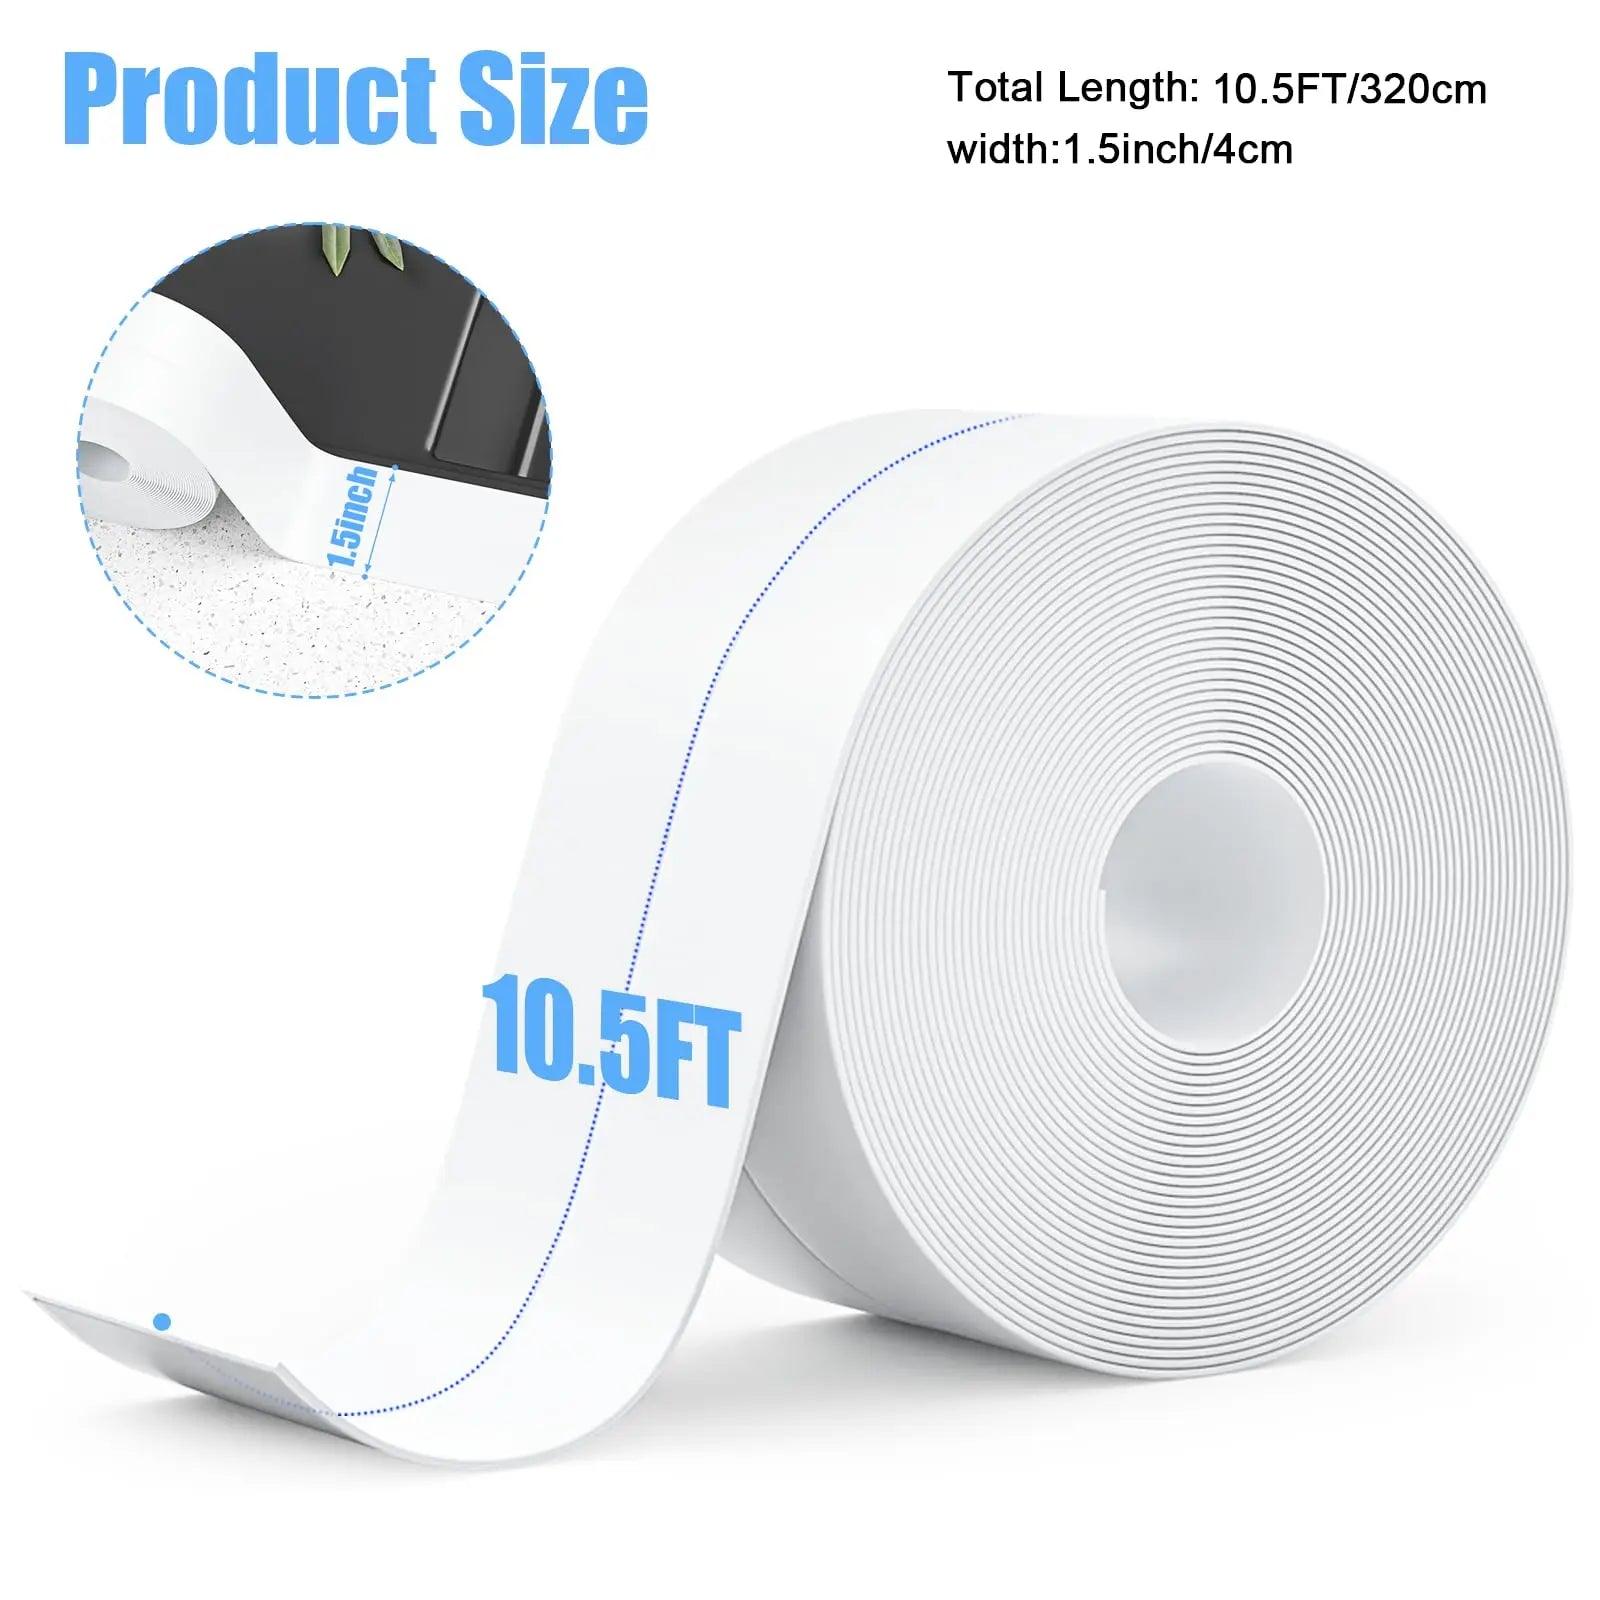 Waterproof PVC Sealing Tape for Bathroom and Kitchen - 3.2m Self Adhesive Caulk Strip for Edge Sealing and Anti Mold Protection  ourlum.com   